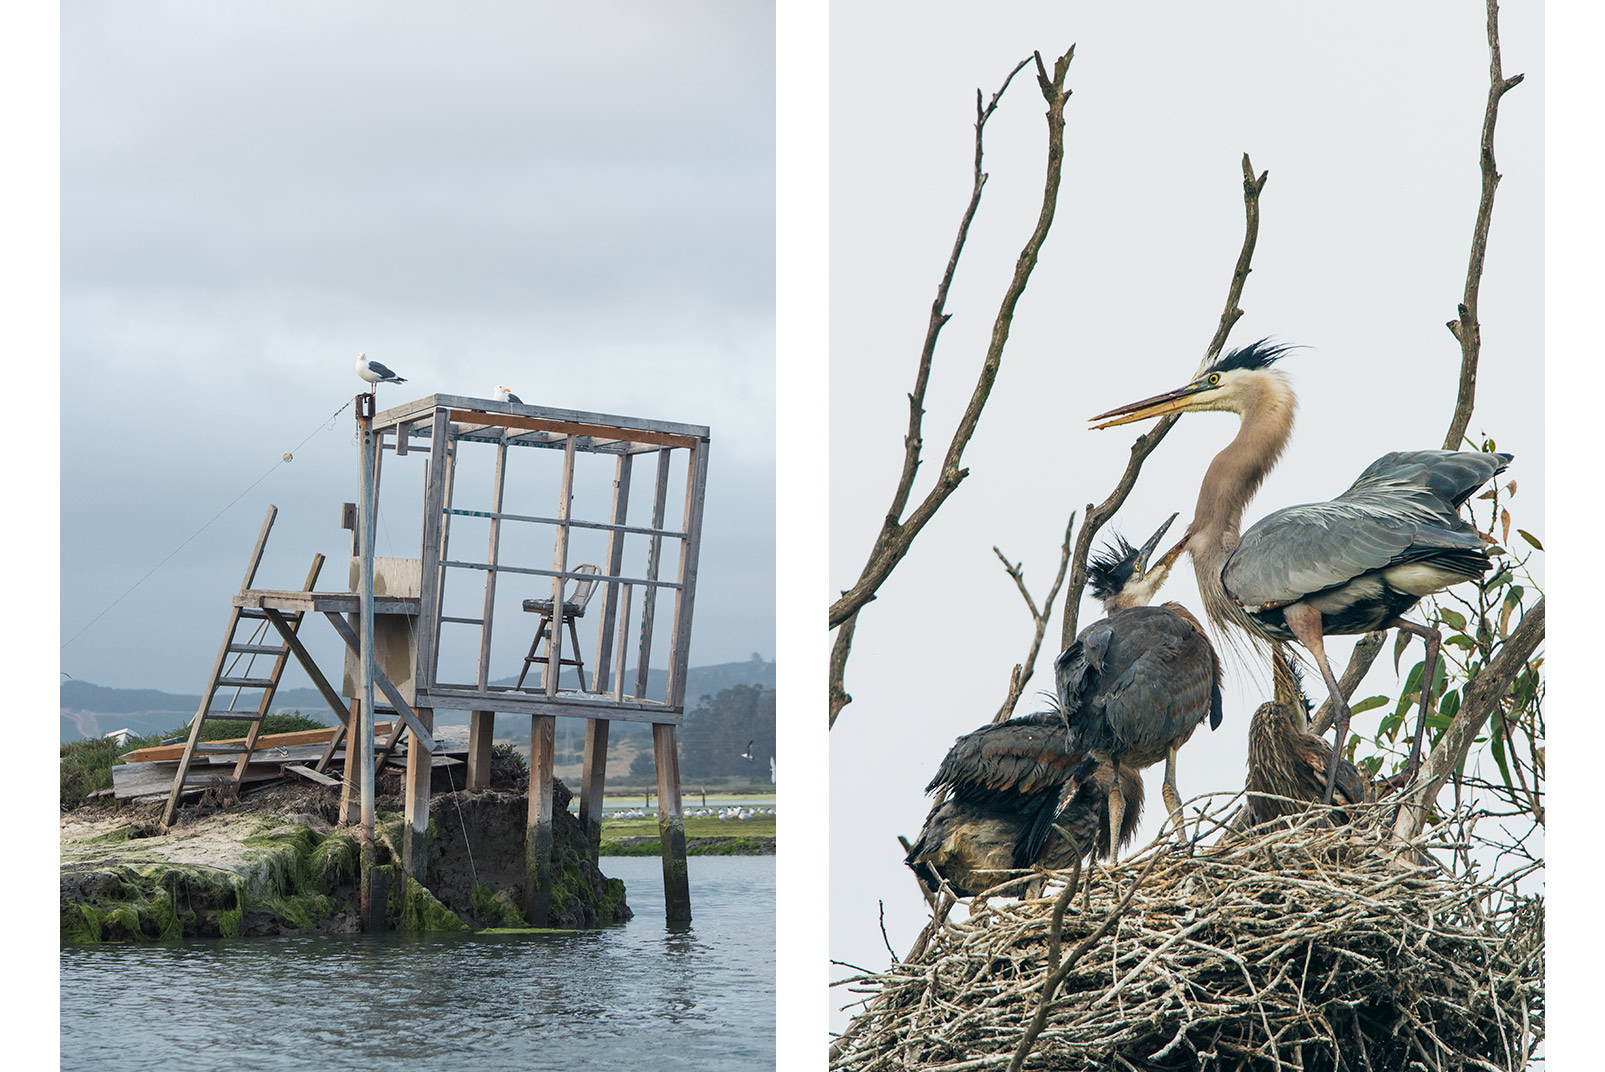 Collaborative conservation efforts to protect lands and reduce runoff and water pollution help protect a variety of birds at Elkhorn Slough. Western gulls reside on a nesting colony island, and great blue herons nest in a rookery near Moon Glow Dairy farm. Photos © Kiliii Yuyan